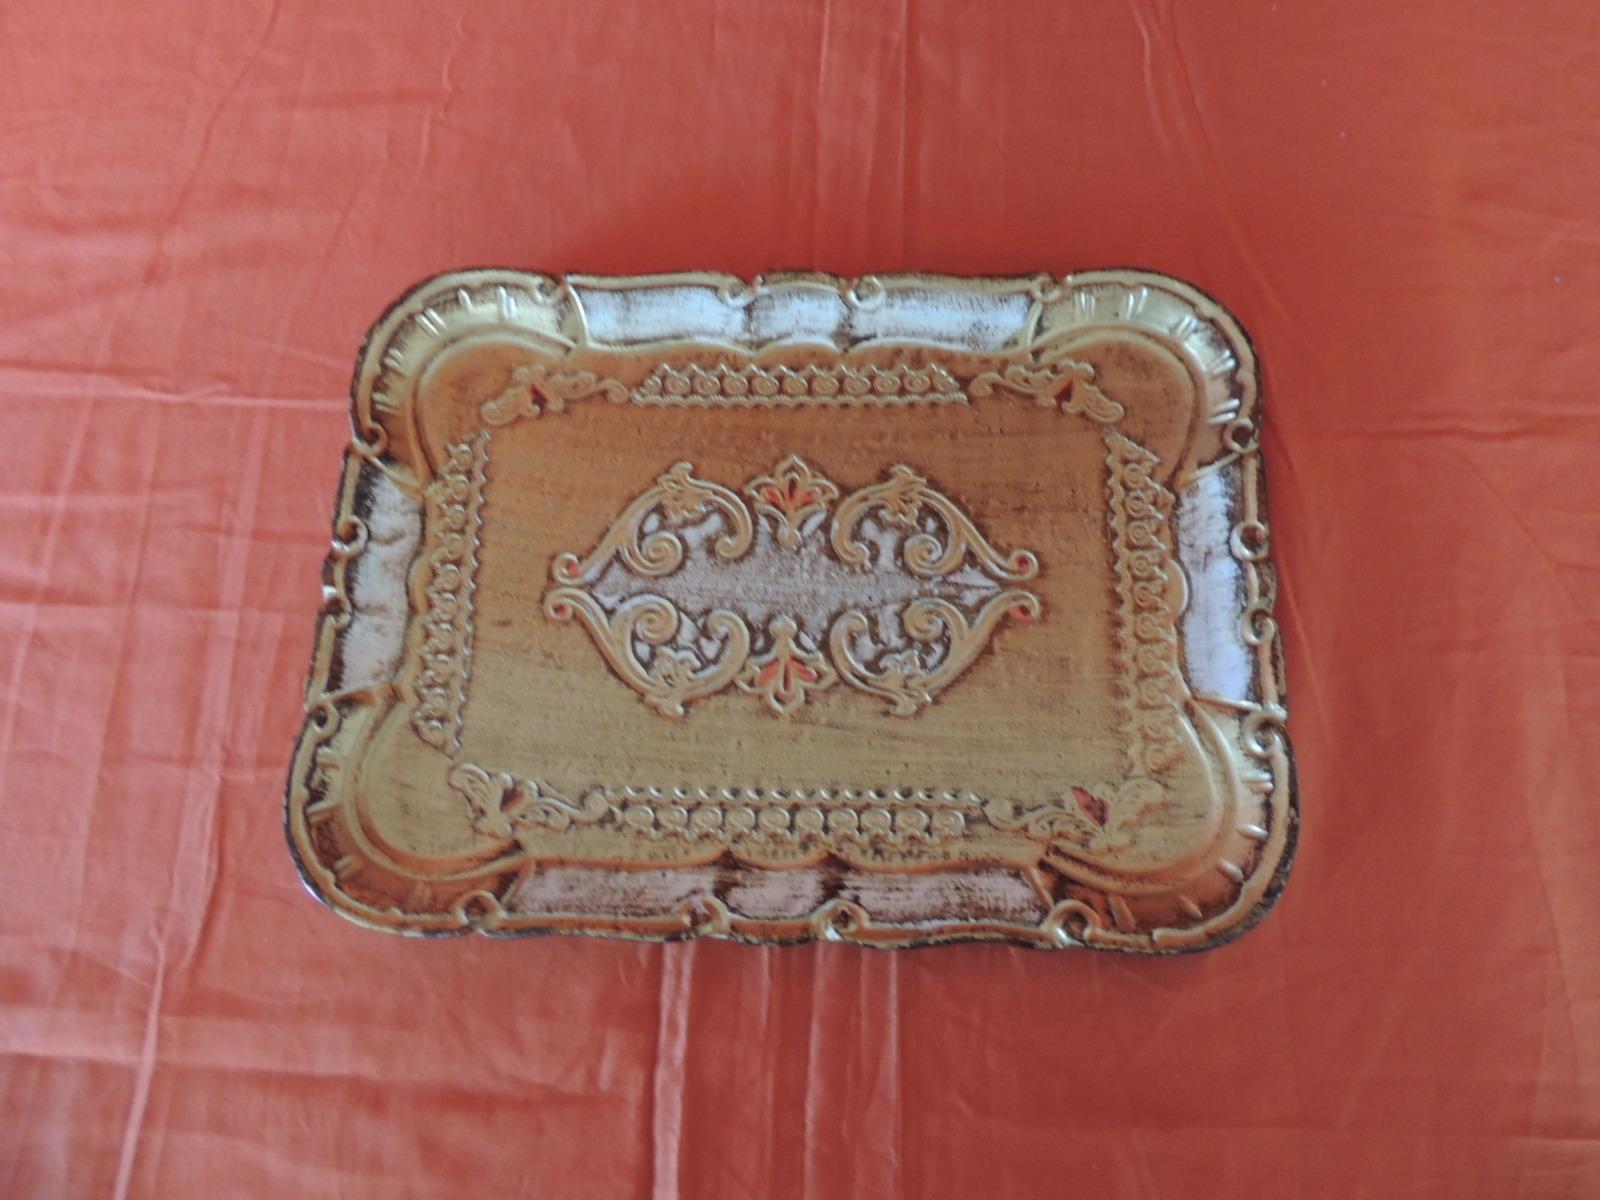 Vintage Florentine gold hand painted mail tray.
Stamped: Made in Florence label in the back.
Size: 8.5